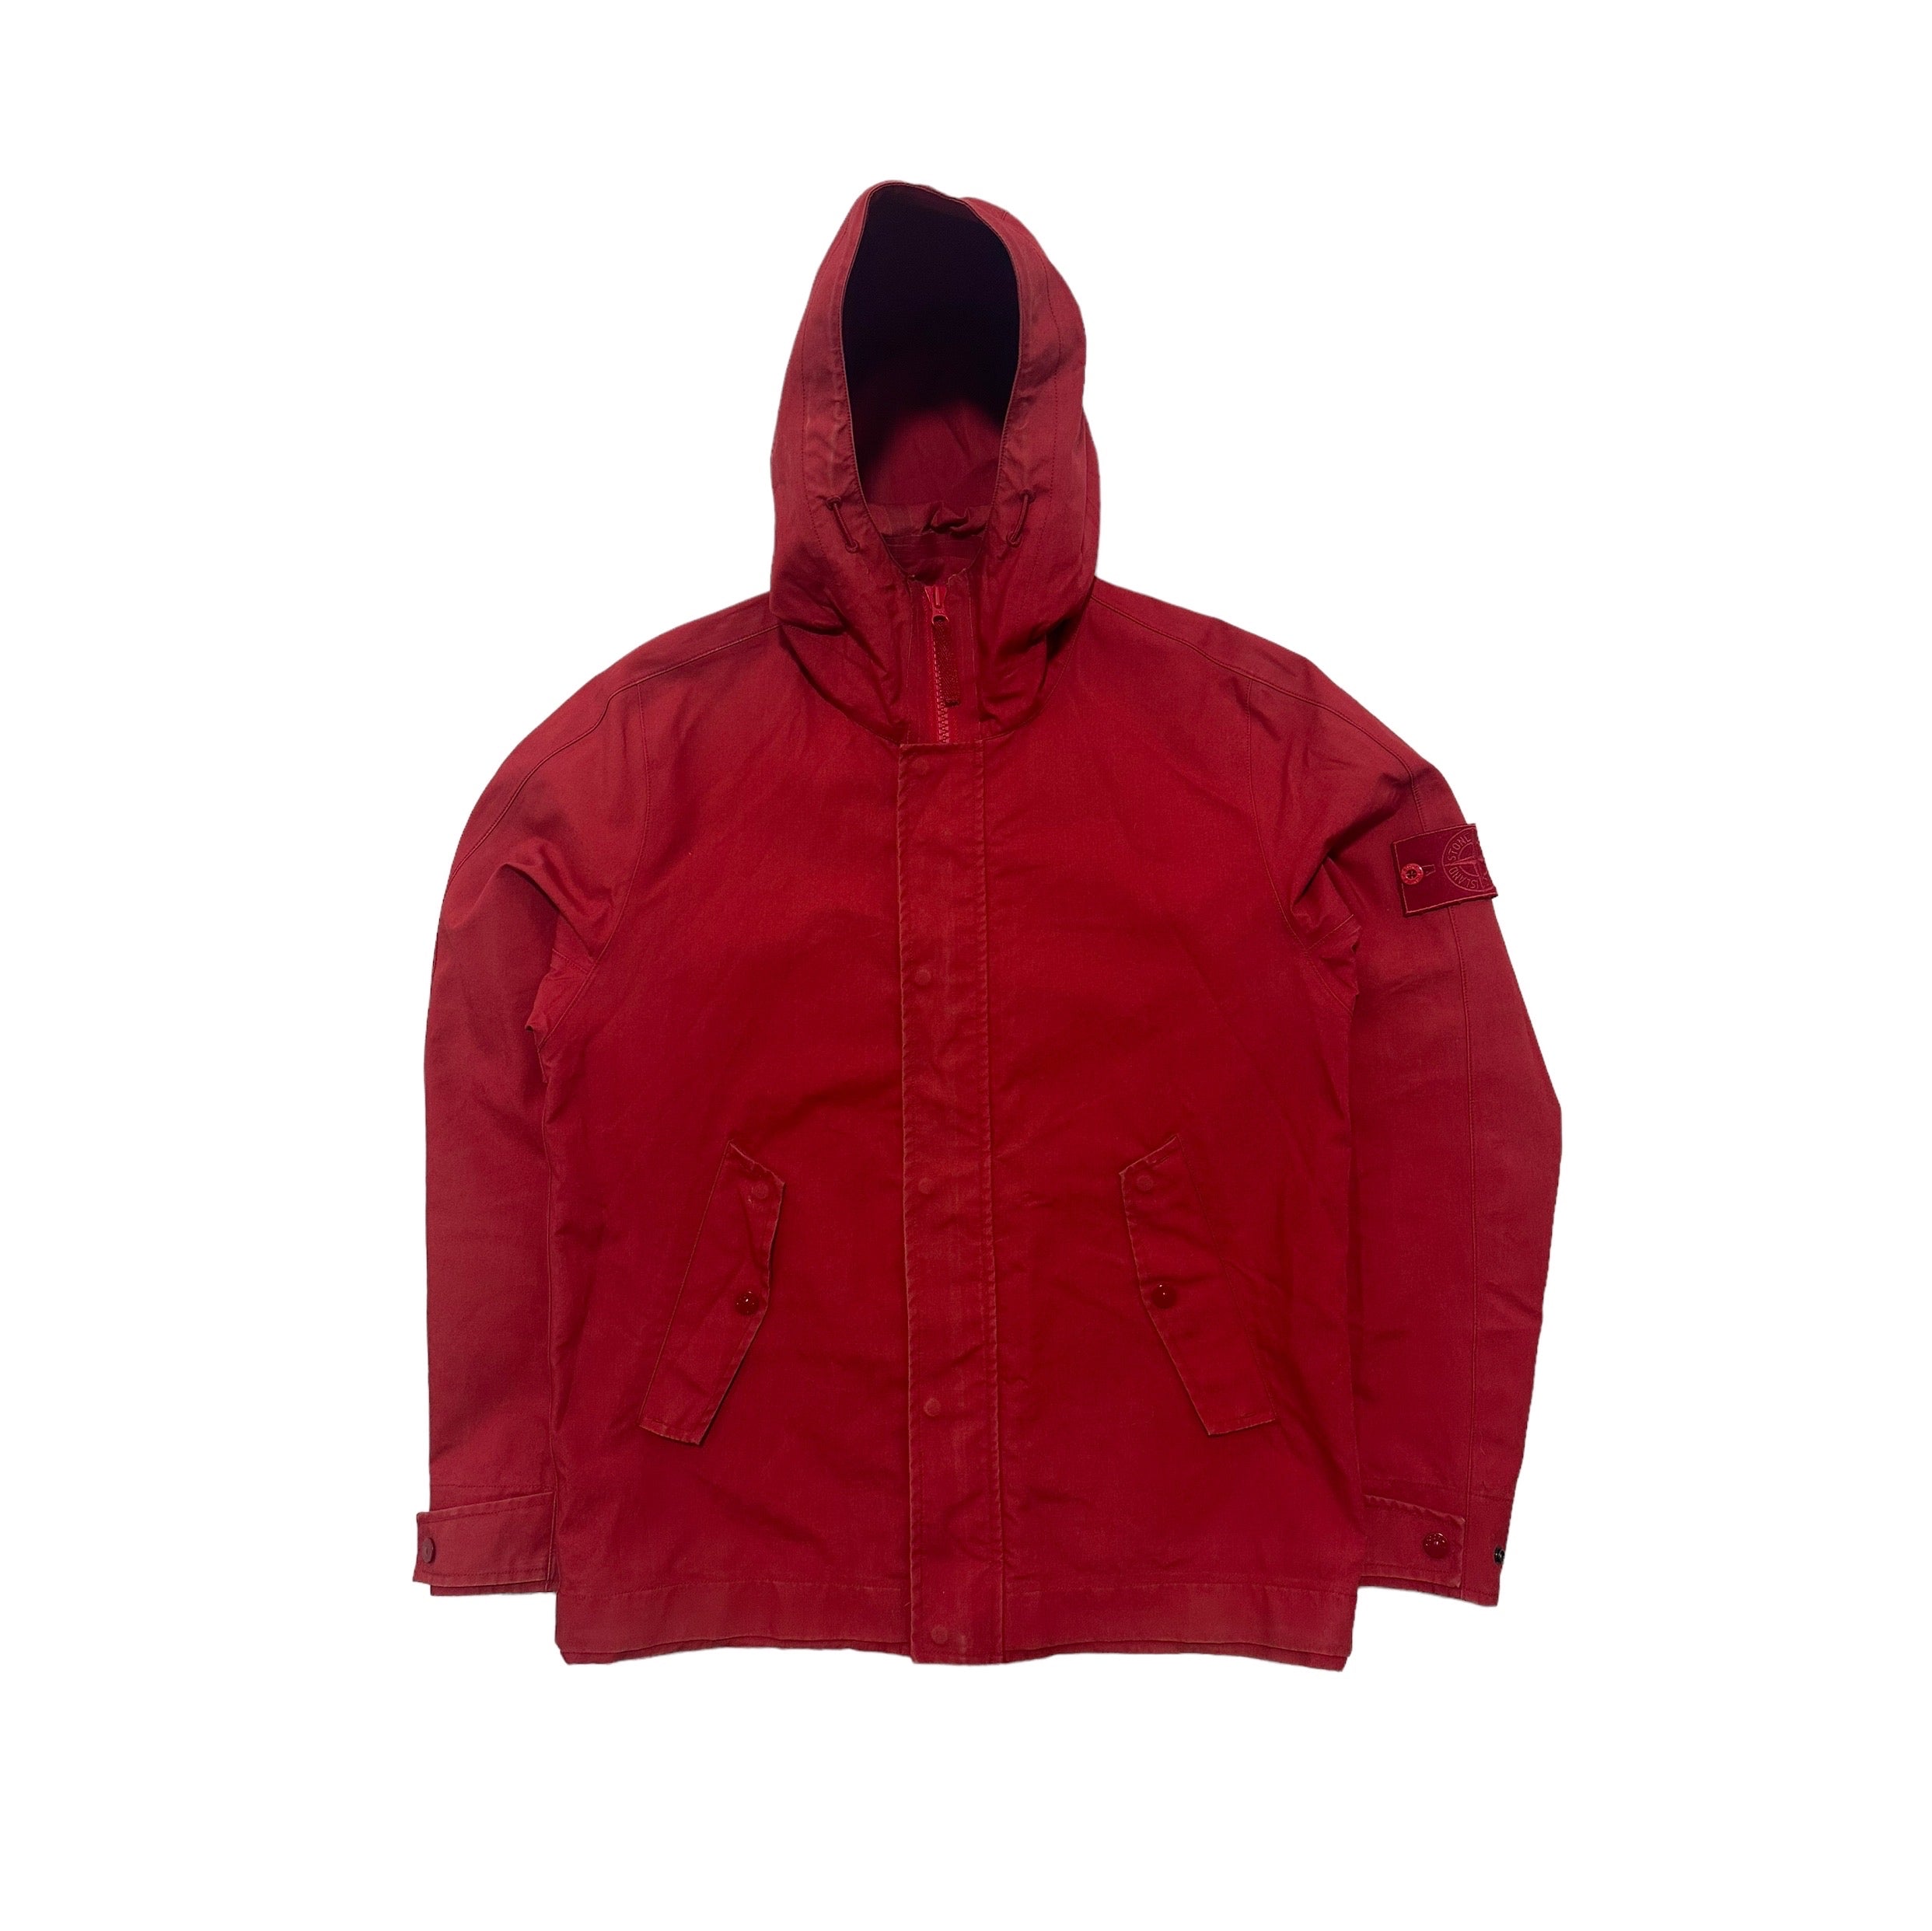 Stone Island Red Ghost 3L Performance Cotton Jacket